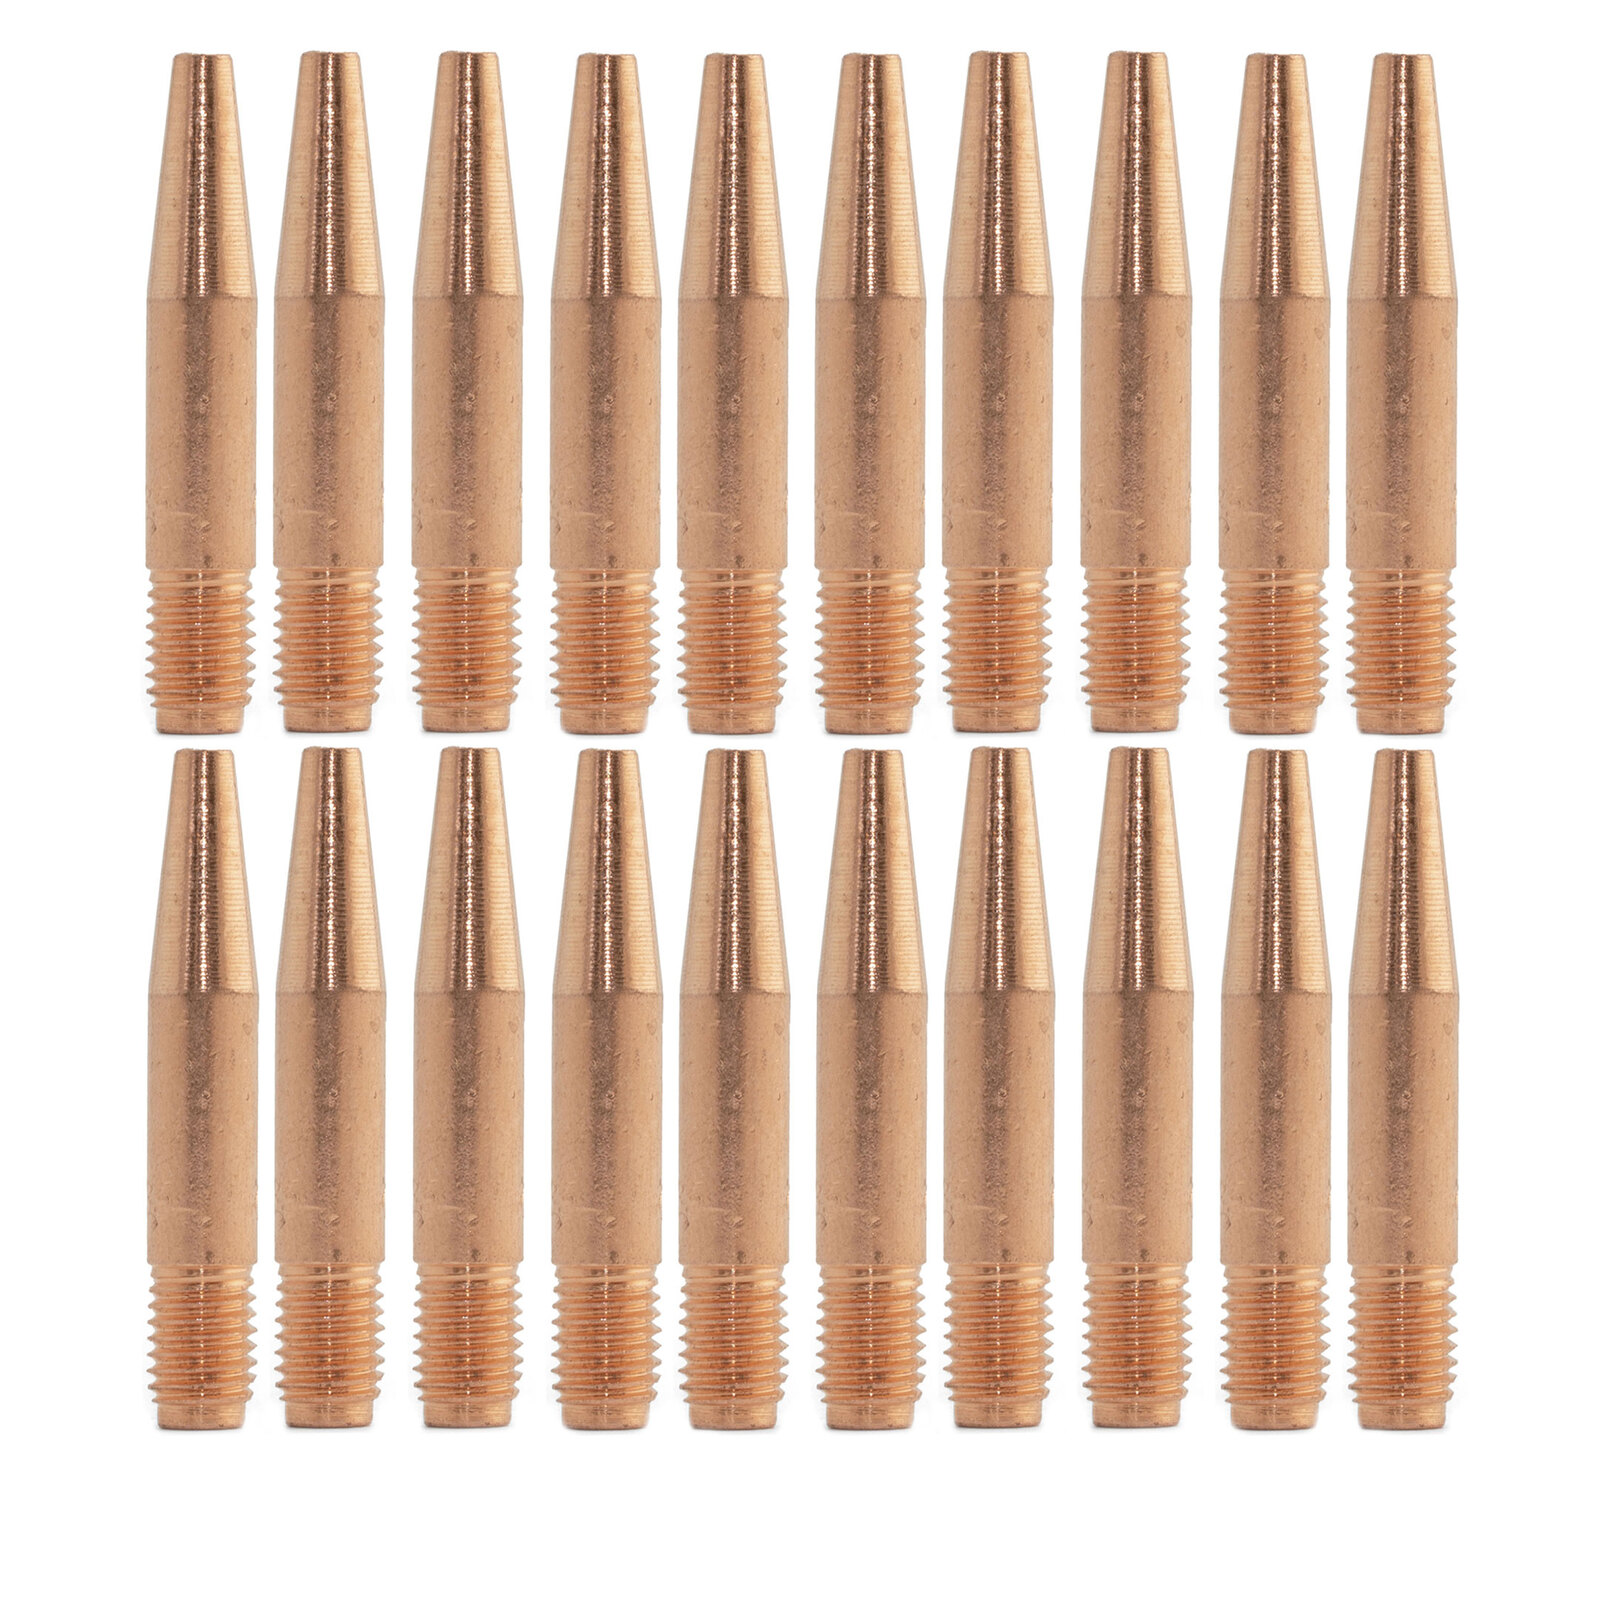 Tweco Style 14T45 TAPERED MIG Contact Tips 1.2mm - 25 Each